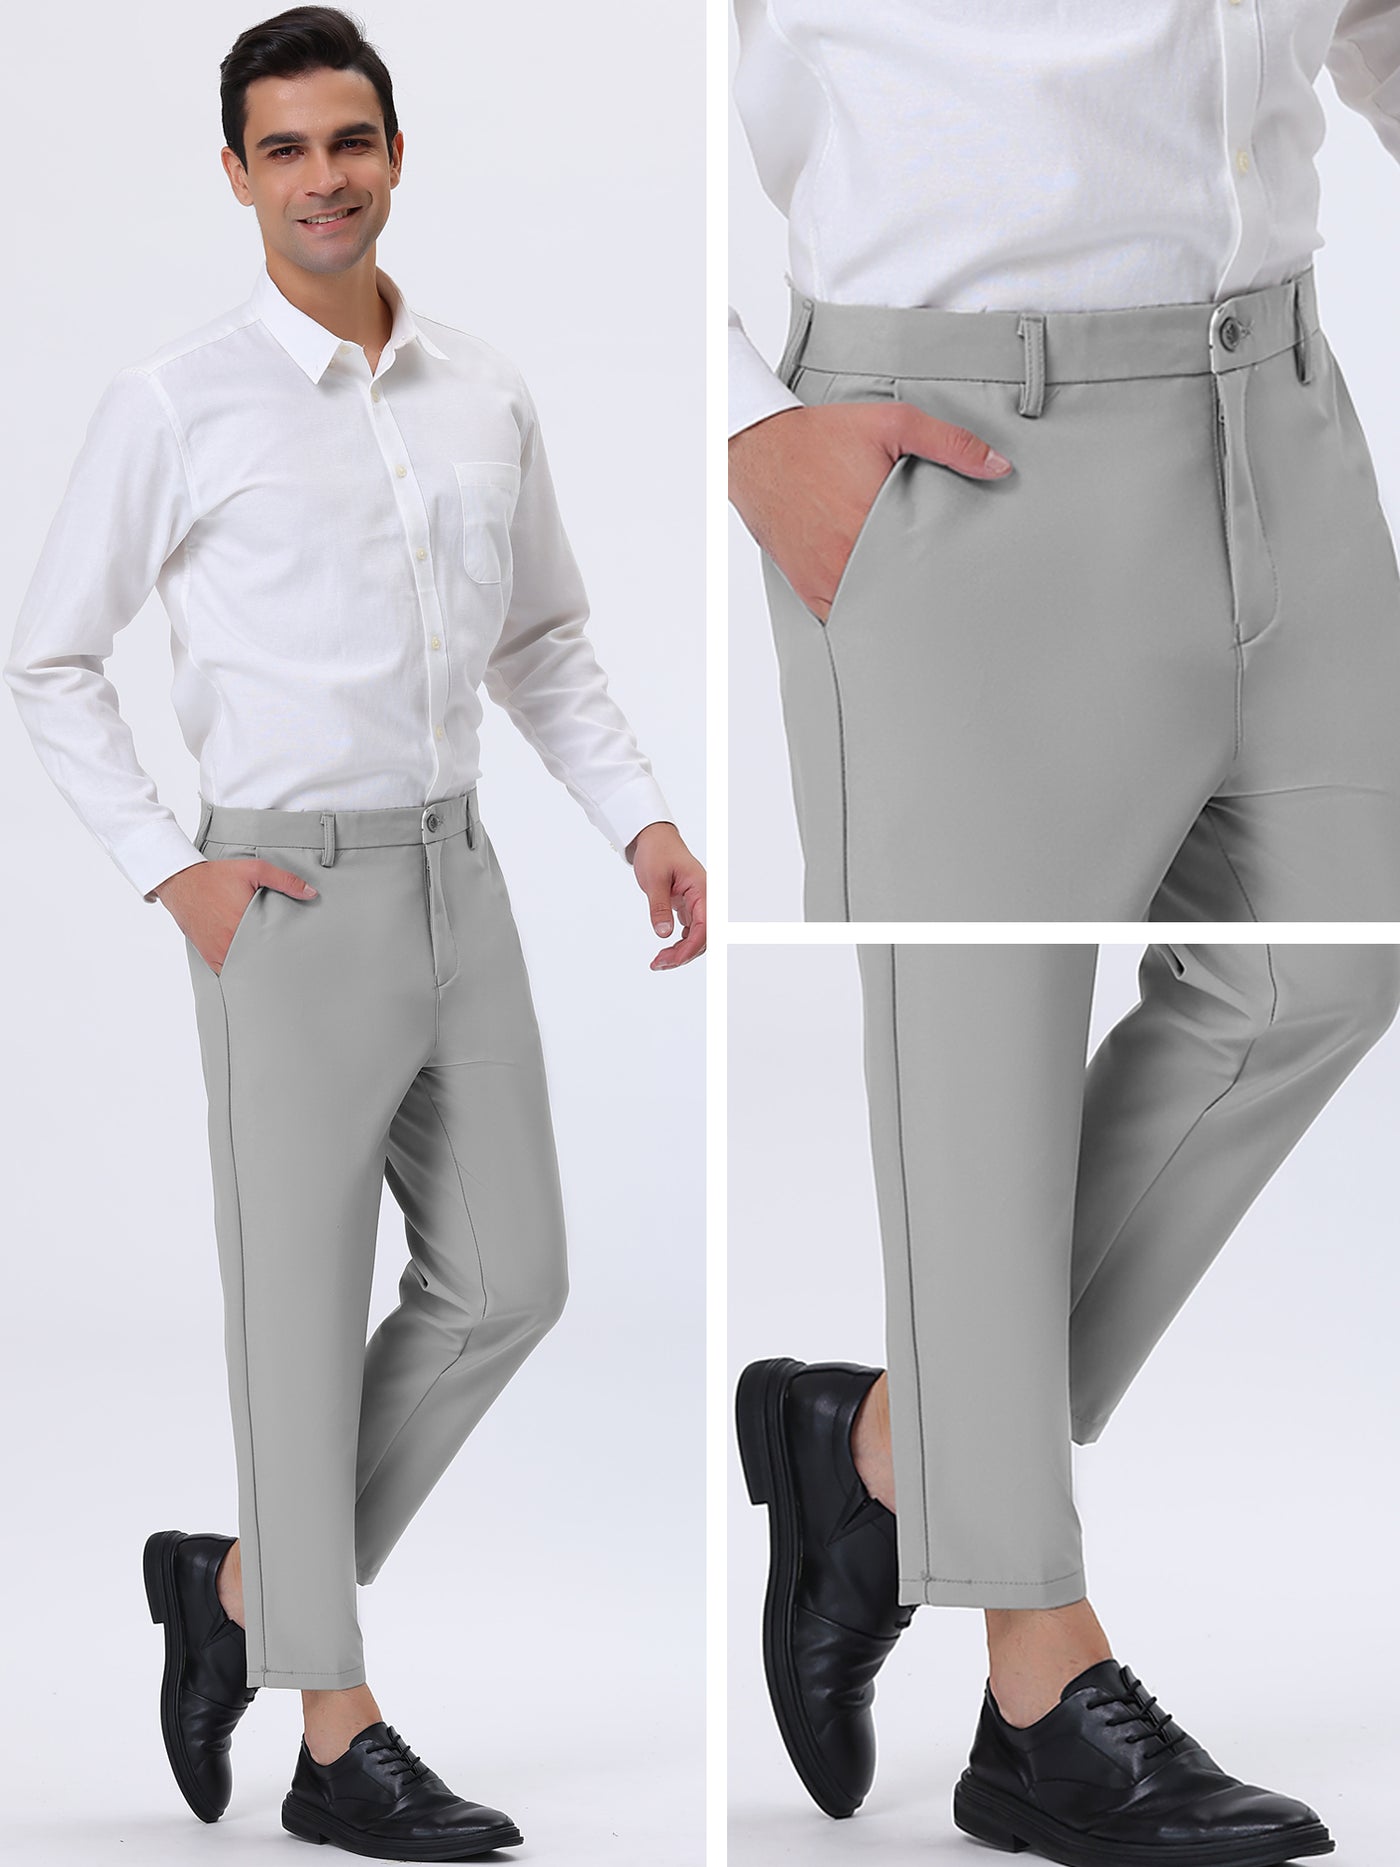 Bublédon Men's Cropped Slim Fit Solid Flat Front Tapered Trousers Suit Pants